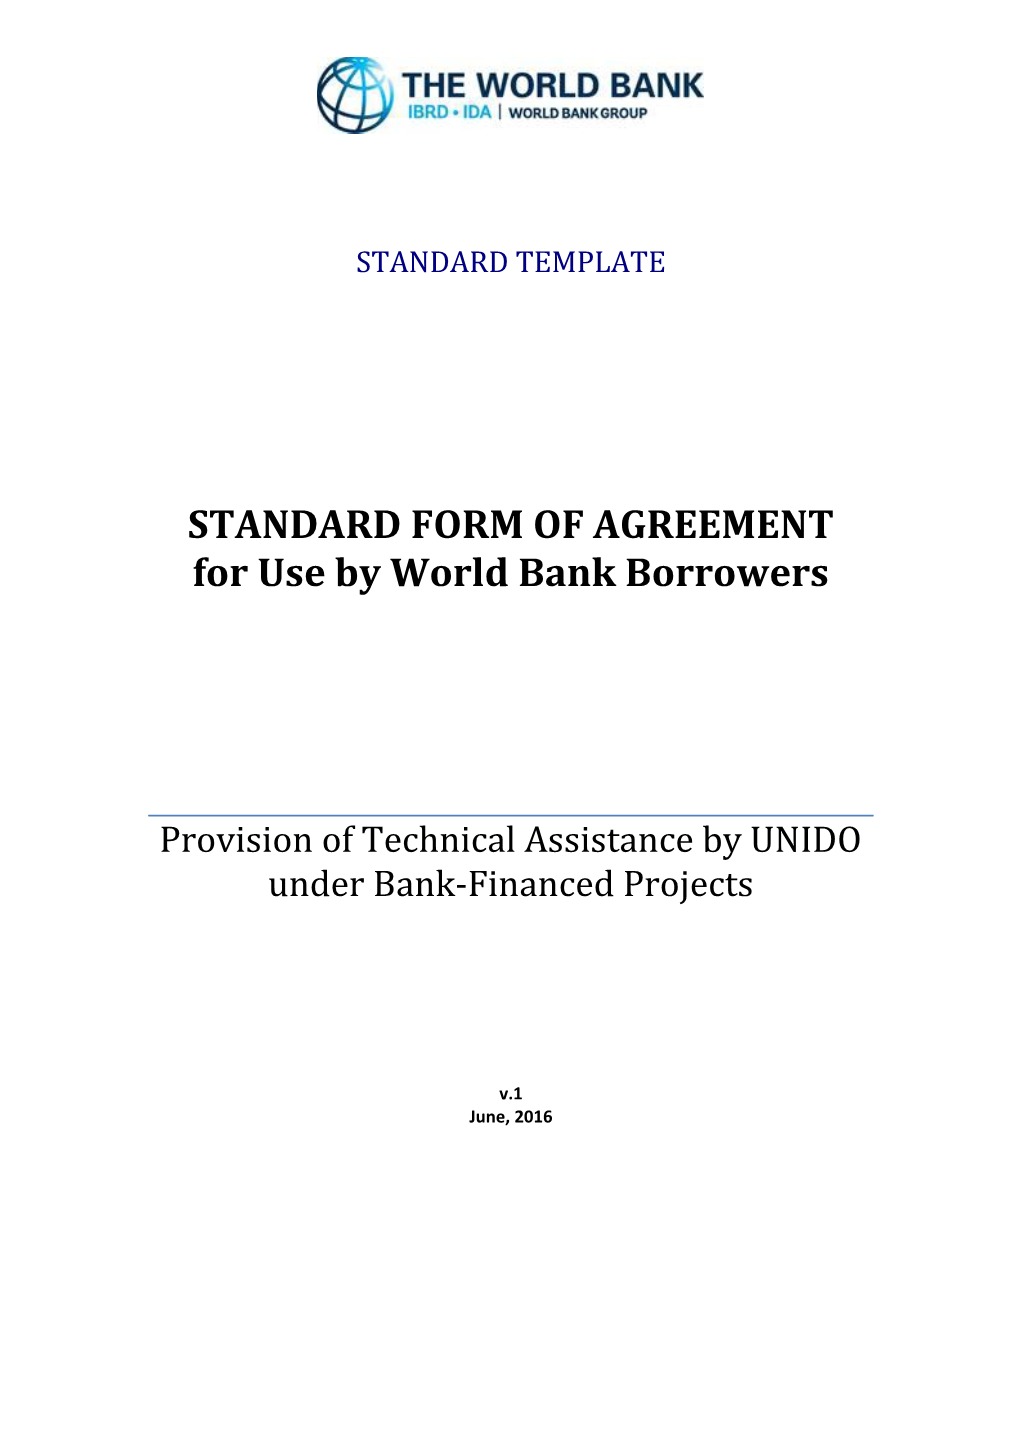 STANDARD FORM of AGREEMENT for Use by World Bank Borrowers s1